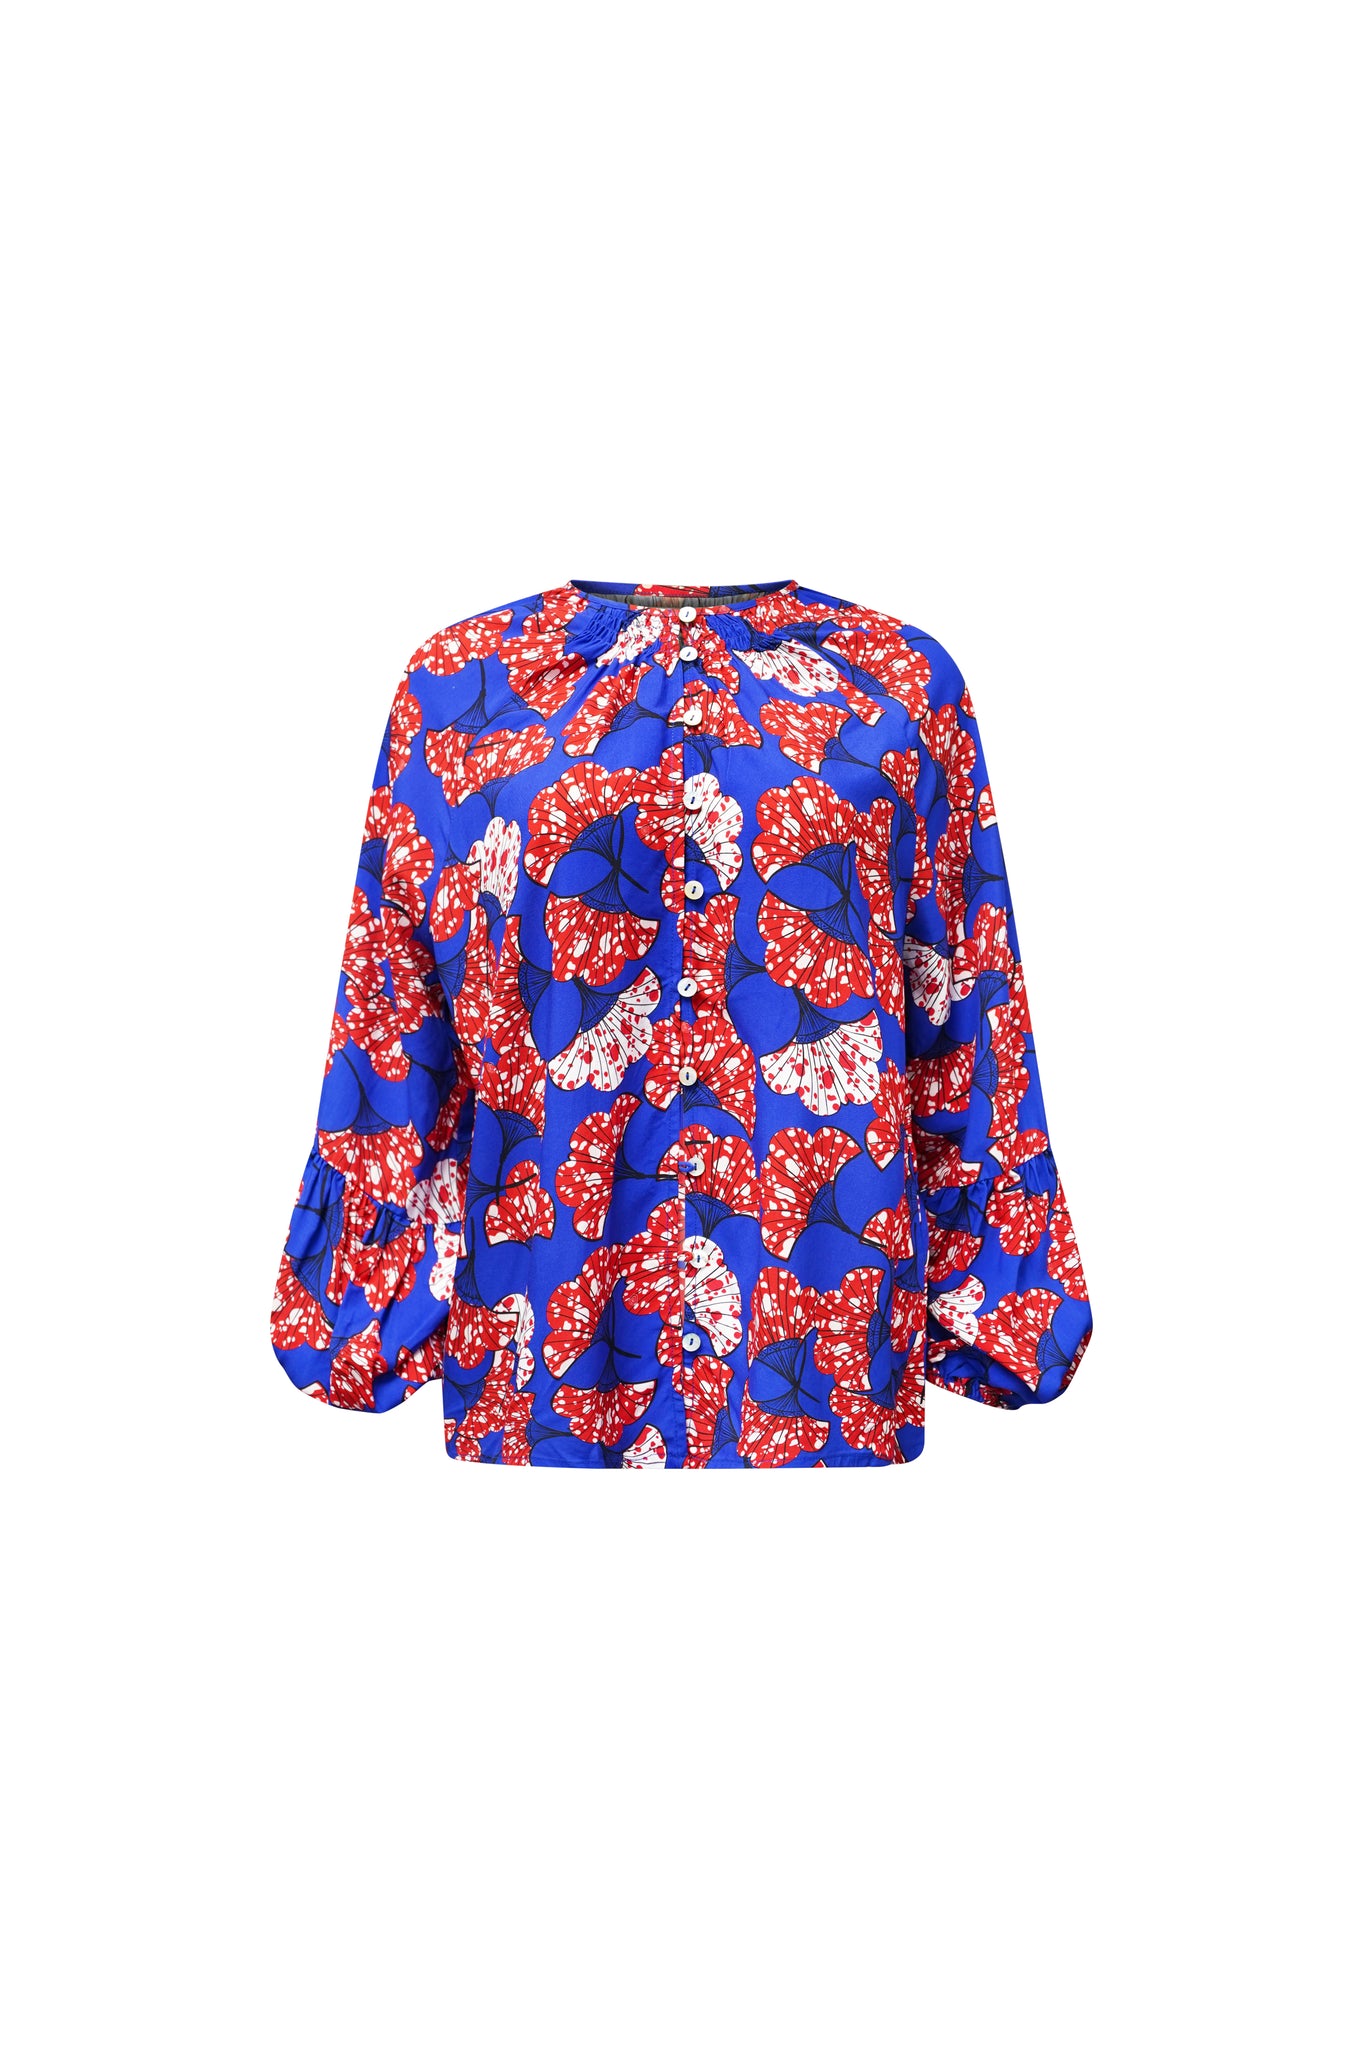 Lulu Shirt Top with Ruffle Neck and Long Sleeves - Blue Red Rolls Royce Print | ILC OA OG